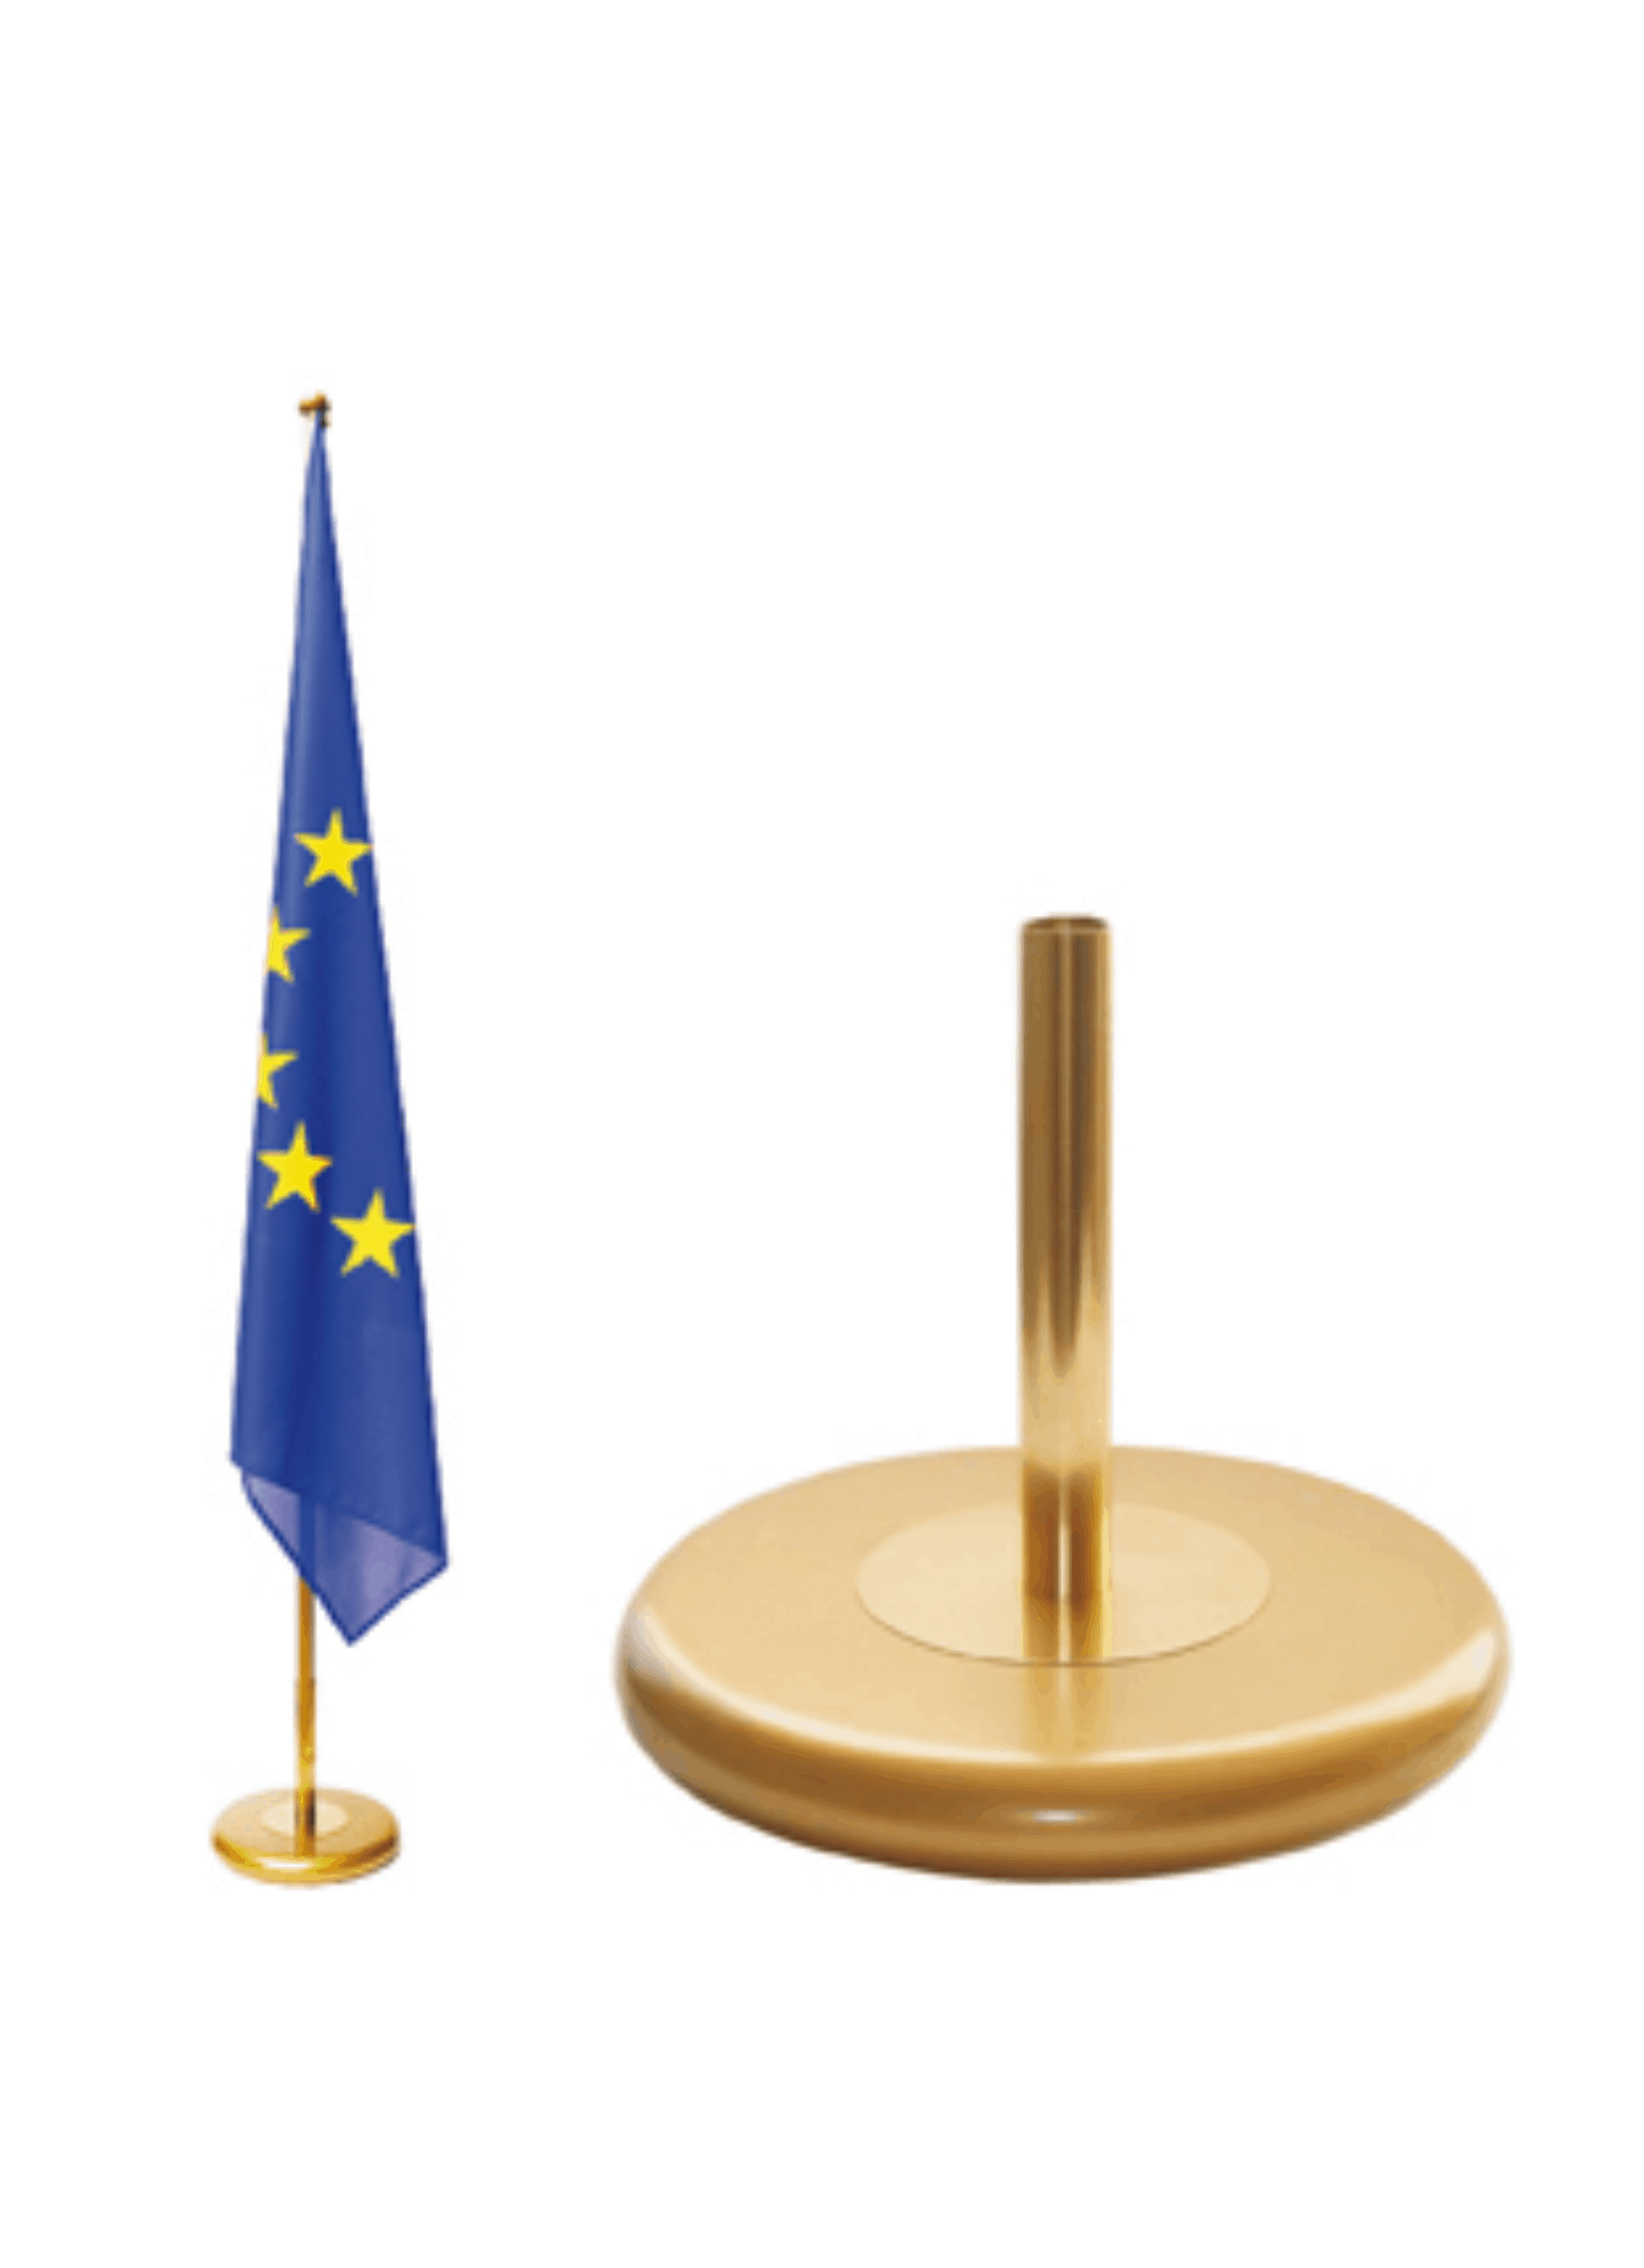 Cabinet flag stand GOLD